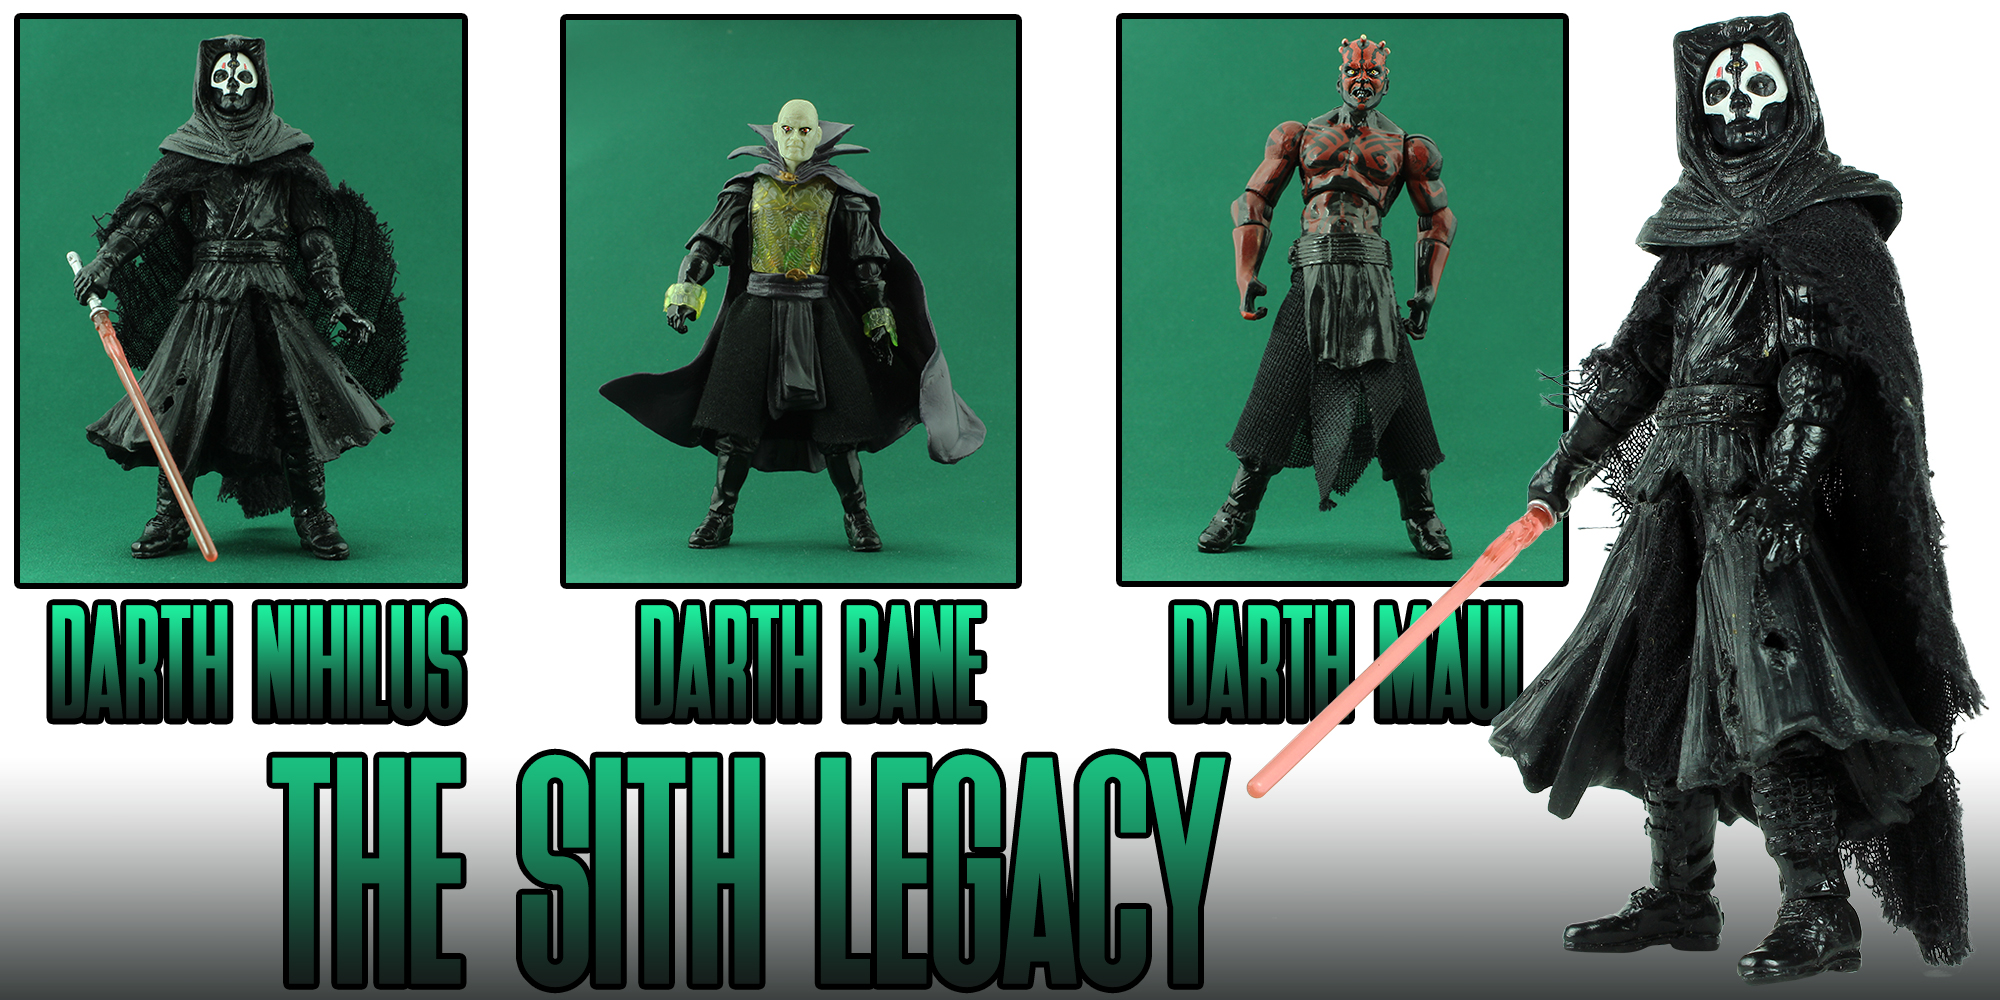 The Sith Legacy Added